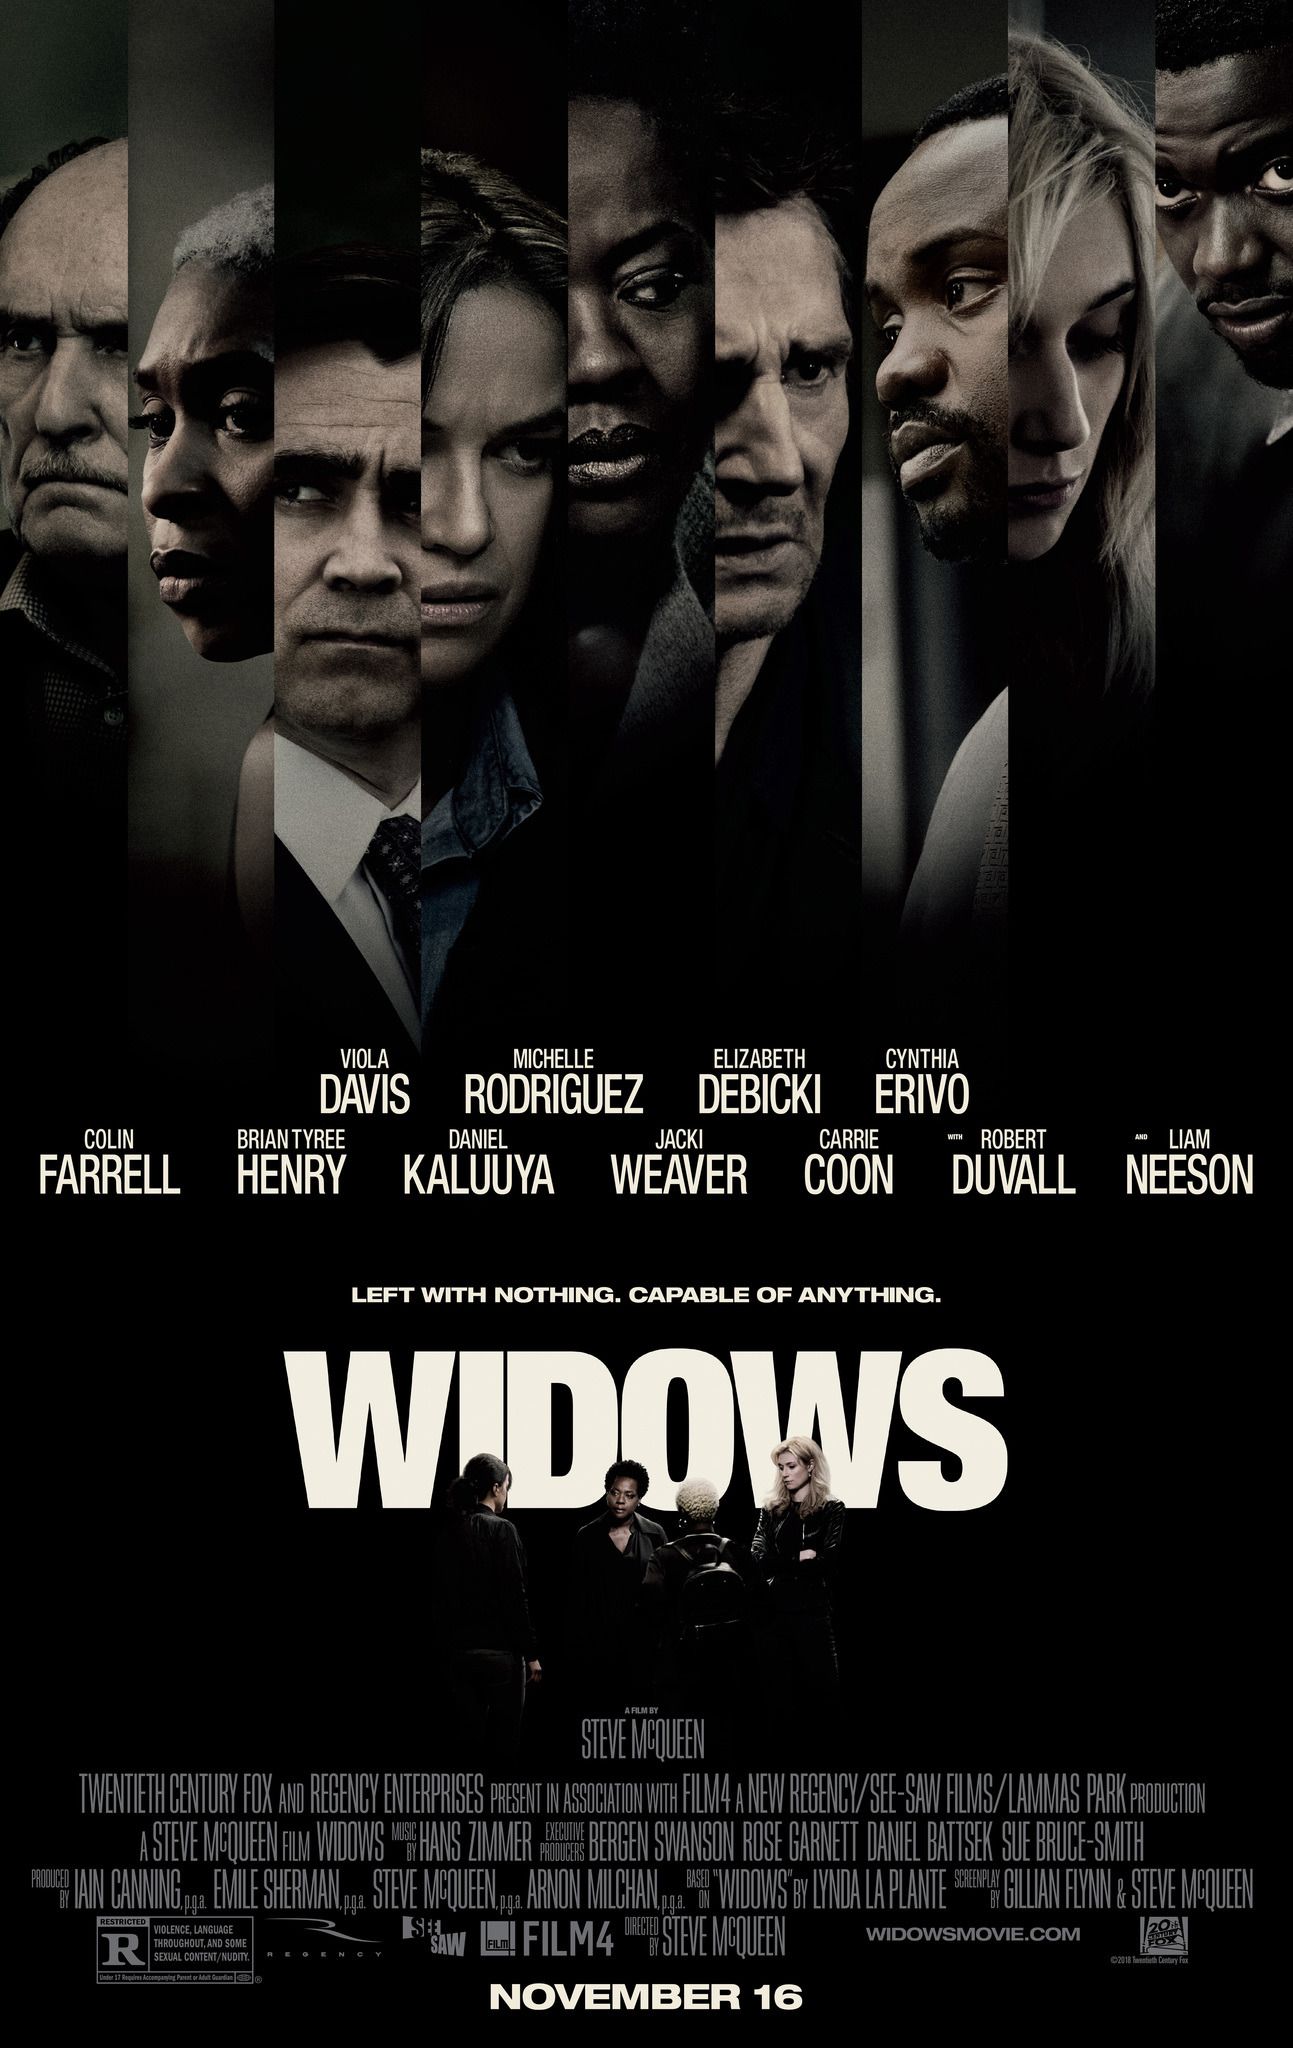 Widows official movie poster